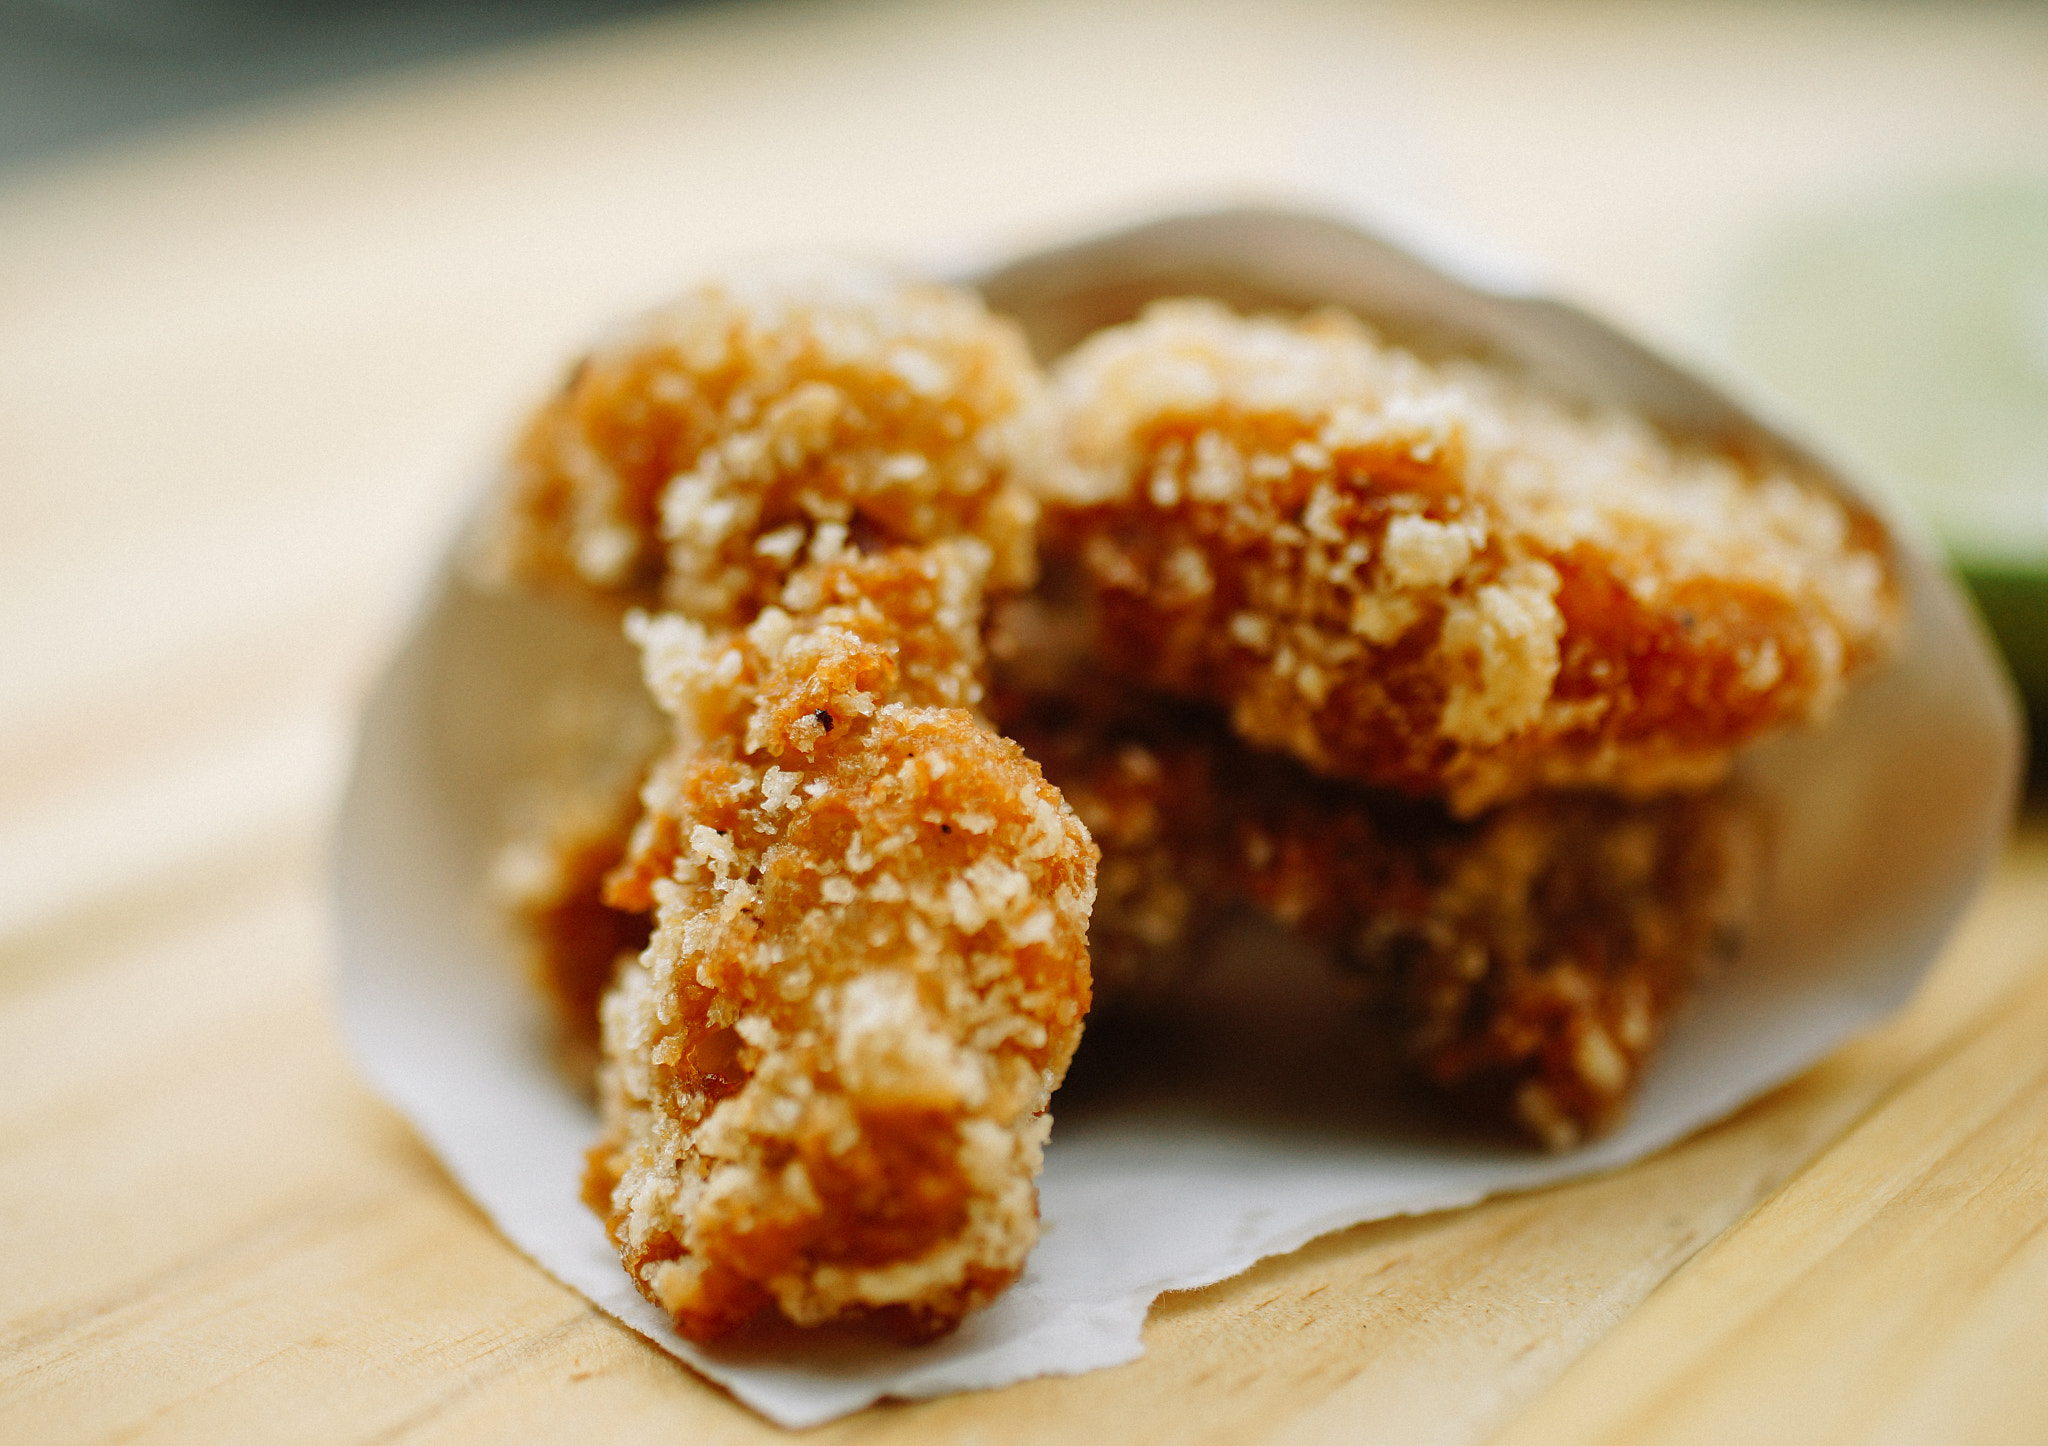 Sony a99 II sample photo. Chicken crunchy photography